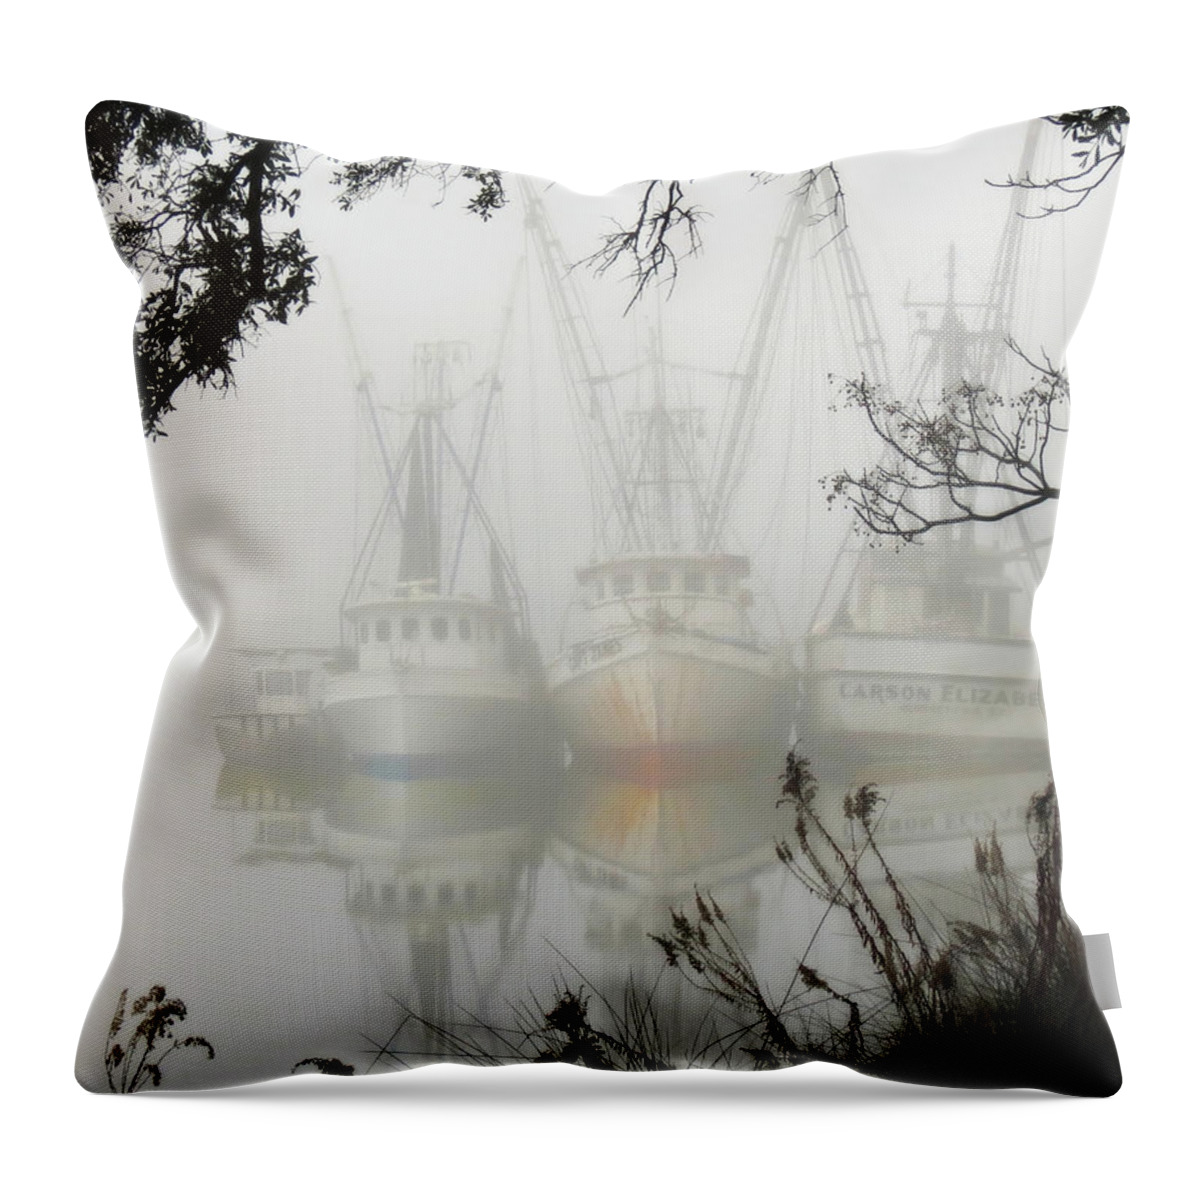 Landscape Throw Pillow featuring the photograph Fogged In by Deborah Smith